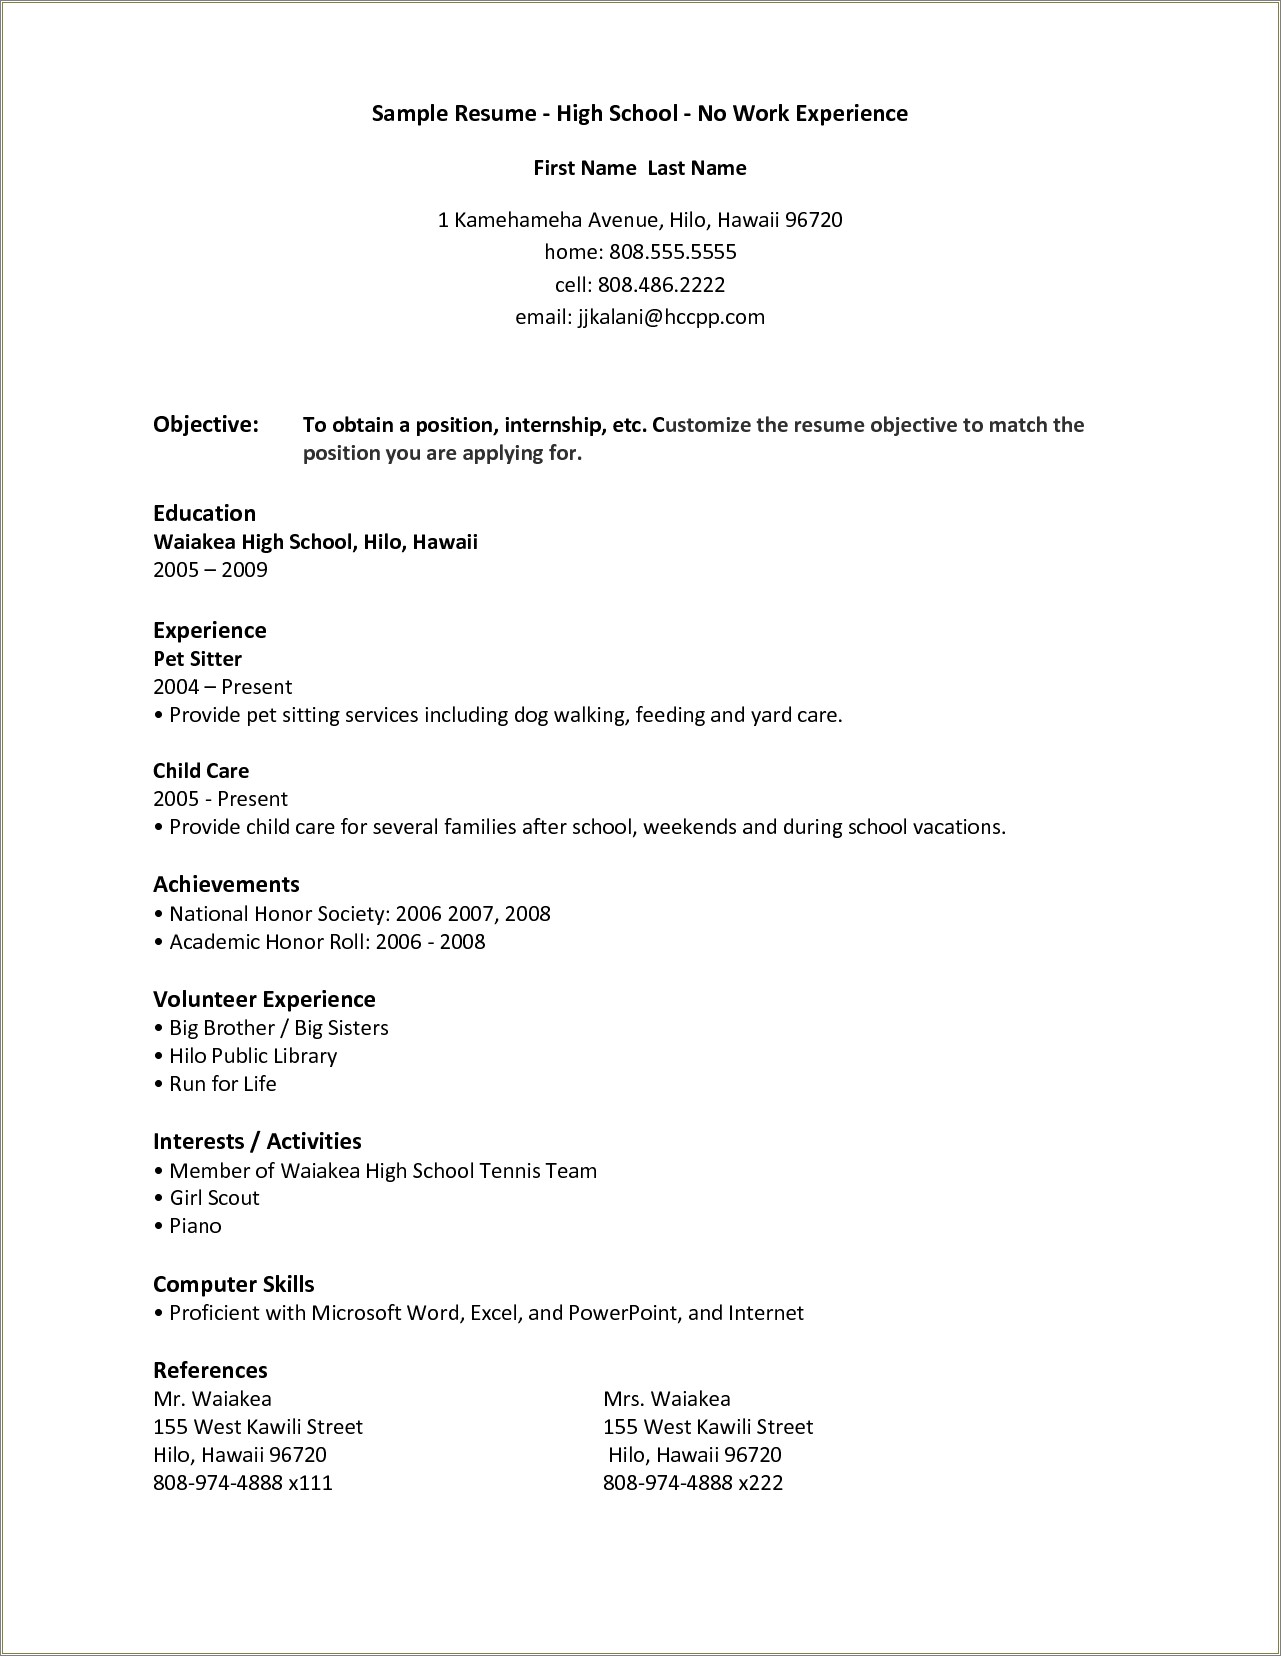 Resume For Entry Level No Work Experience